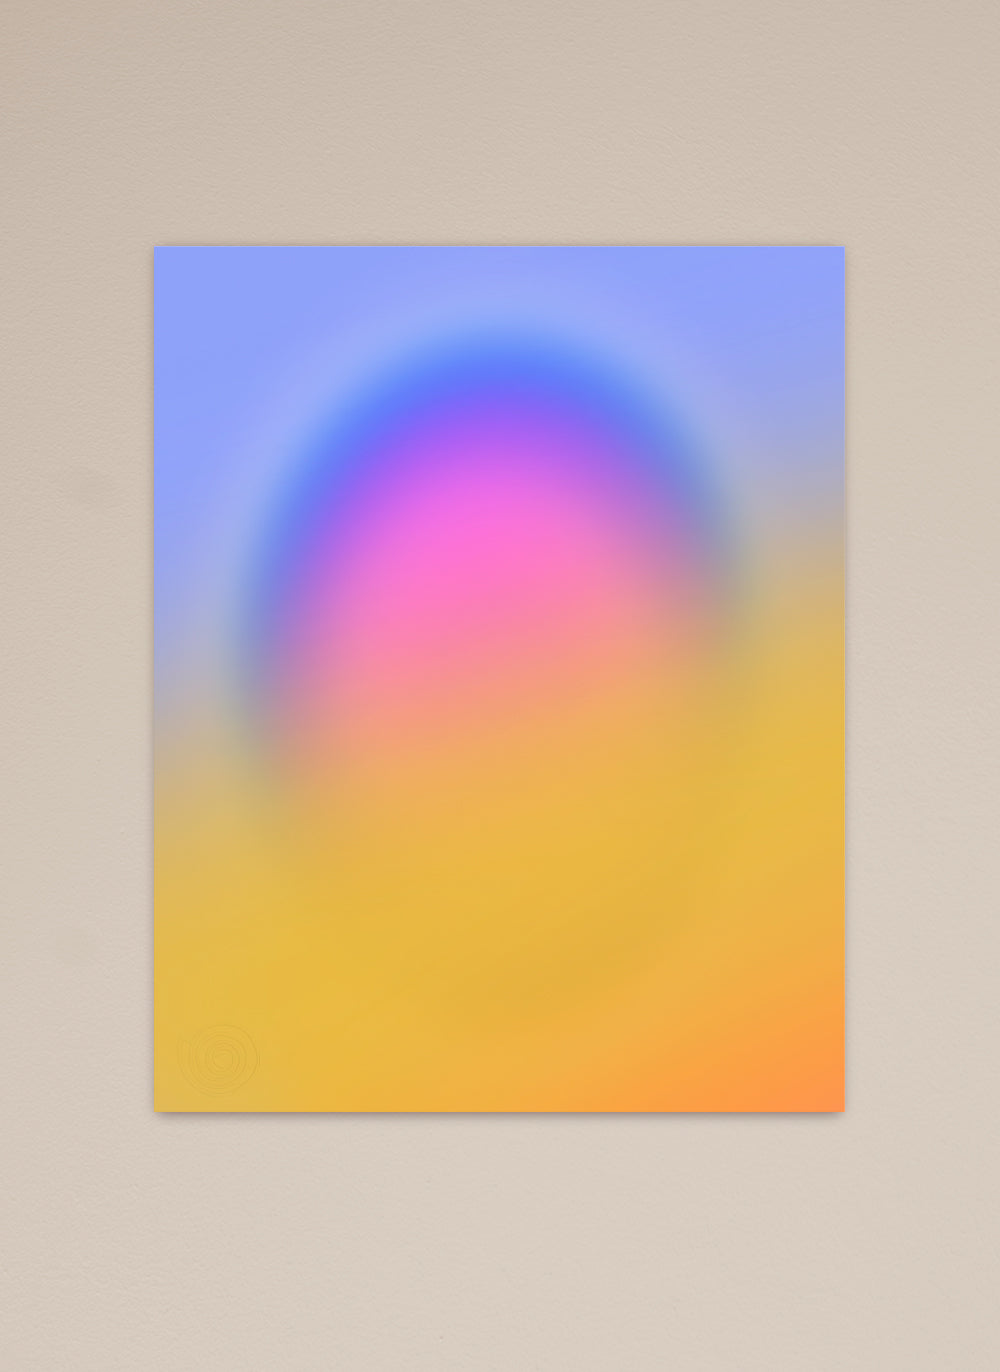 crossed by print poster vertical 30 x 40 cm yellow pink blue 